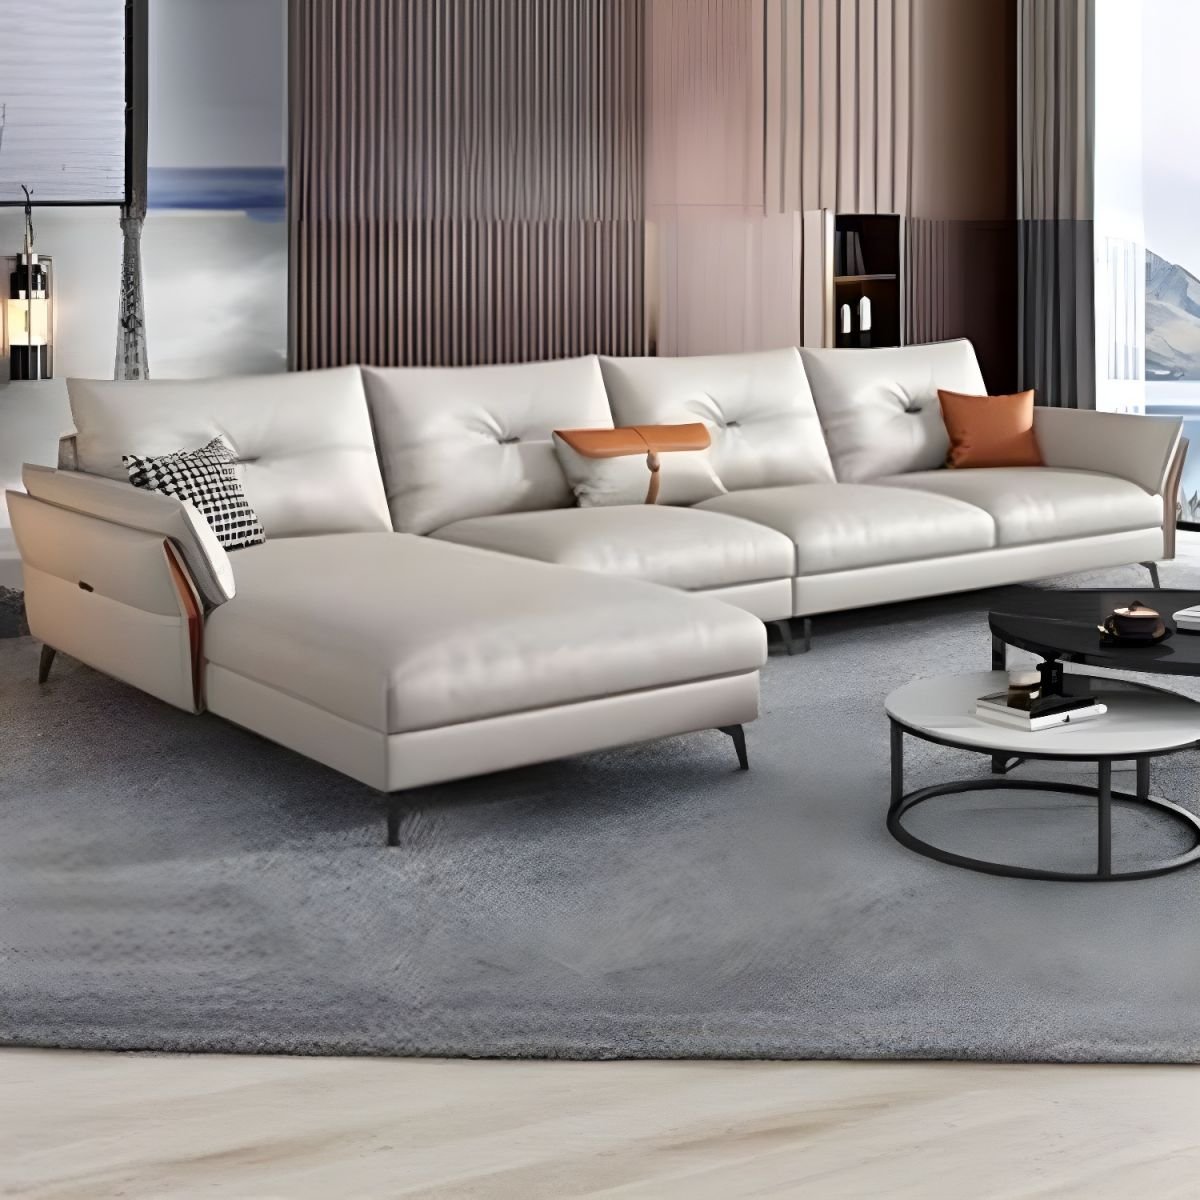 Faux Leather Modern Sectional Sofa with Flared Arm and Water Resistant - Off-White 126"L x 67"W x 31.5"H Tech Cloth